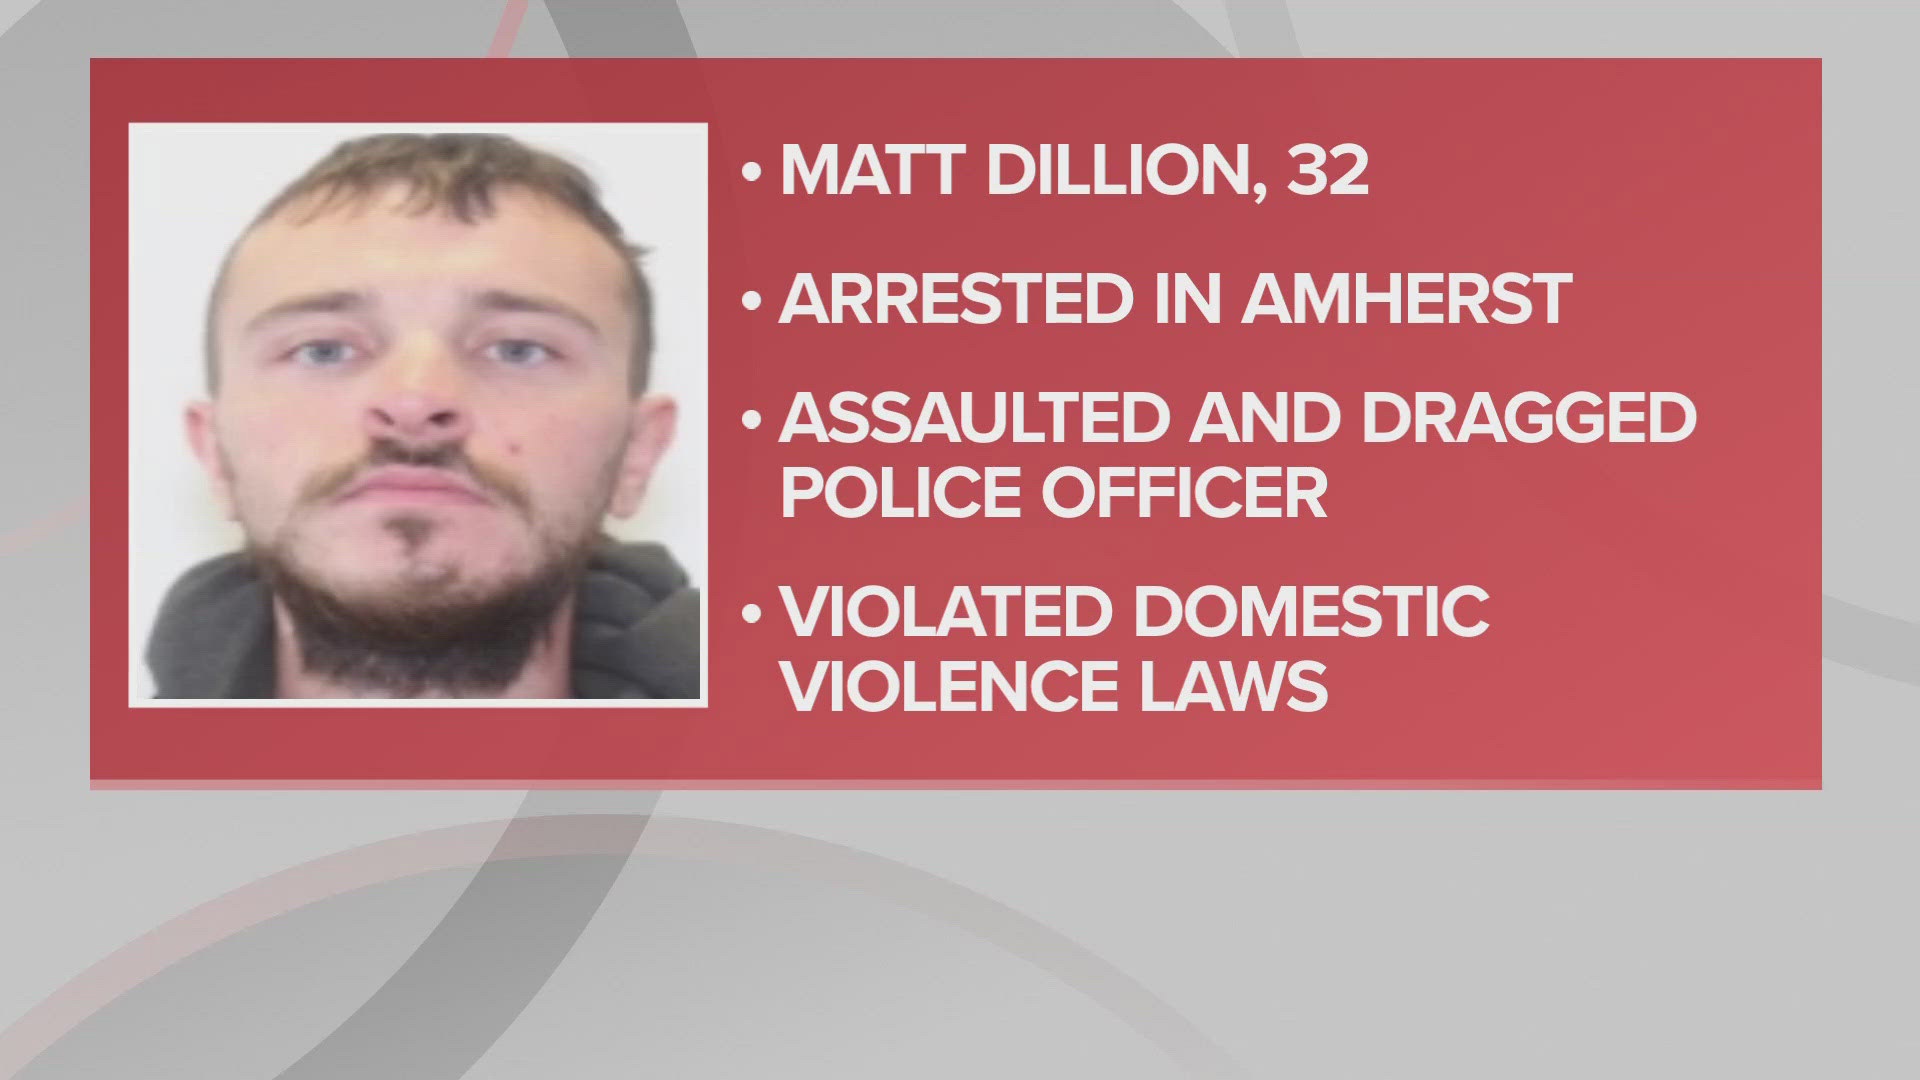 Authorities say Matt Dillion, 32, violated Ohio's domestic violence laws and dragged a police officer by his pickup truck while evading arrest.